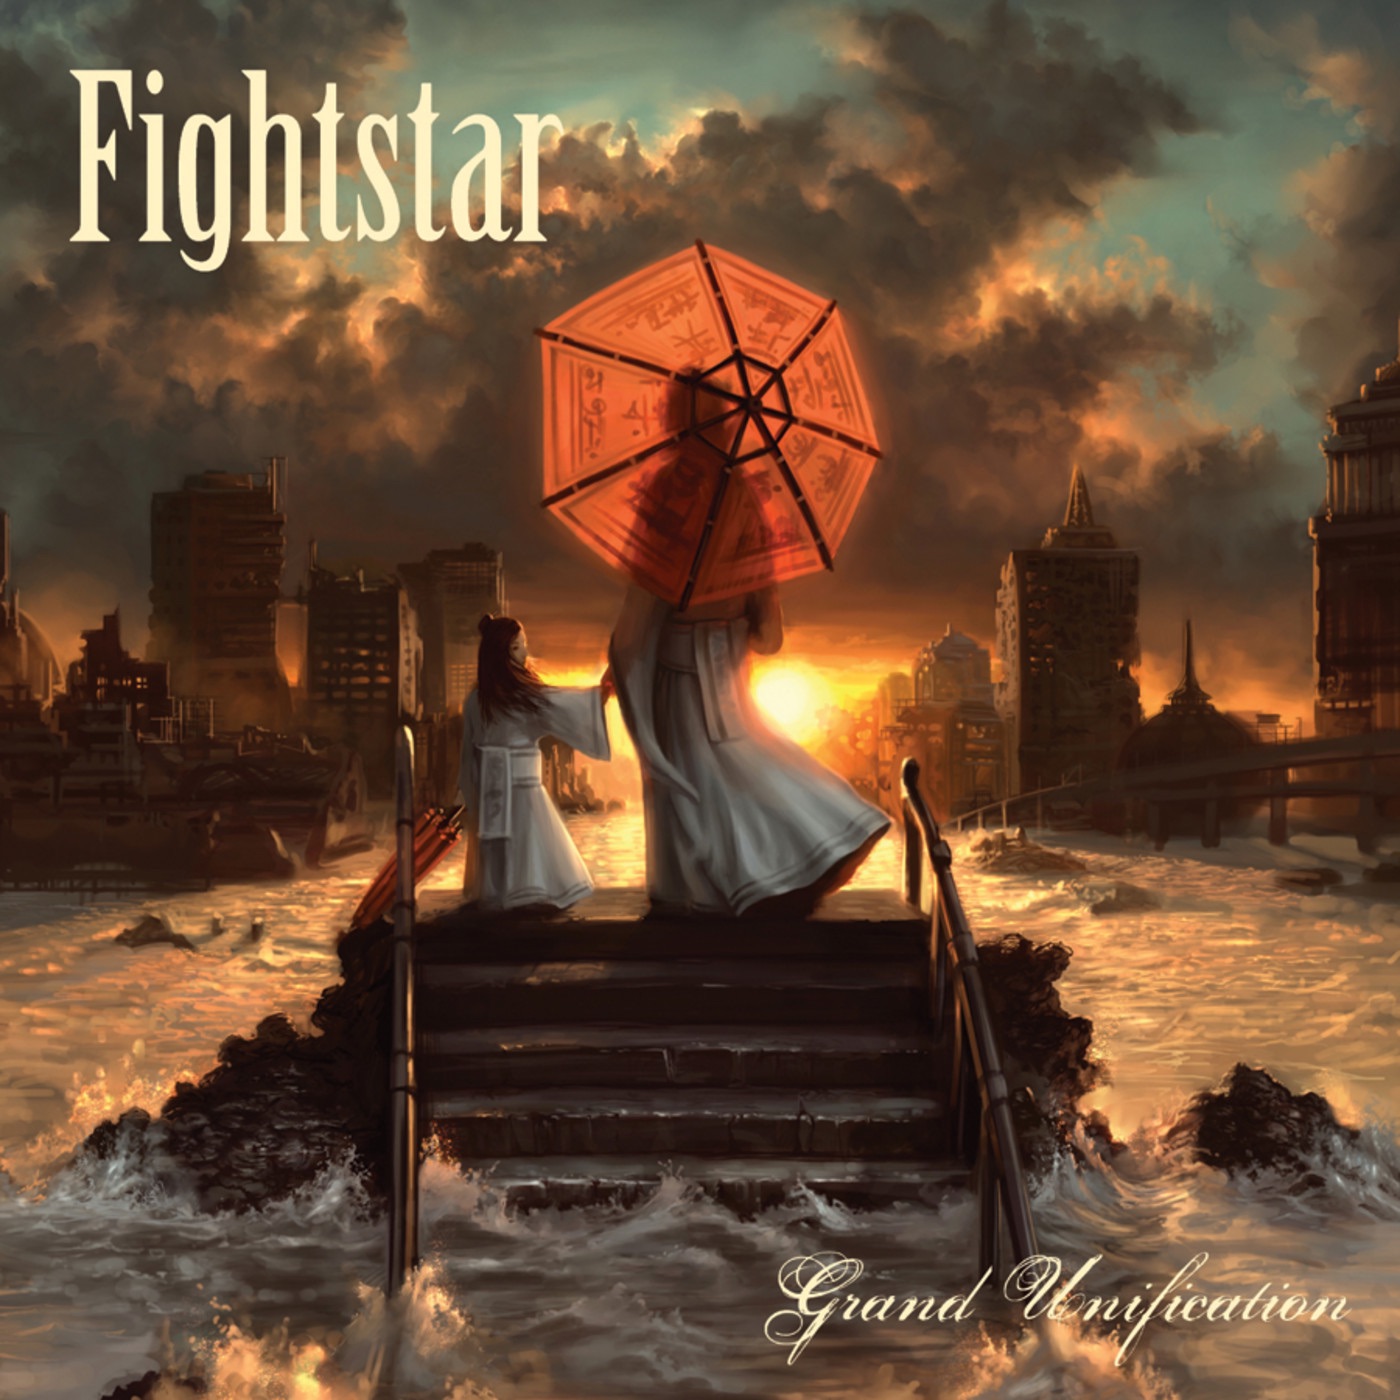 Grand Unification by Fightstar